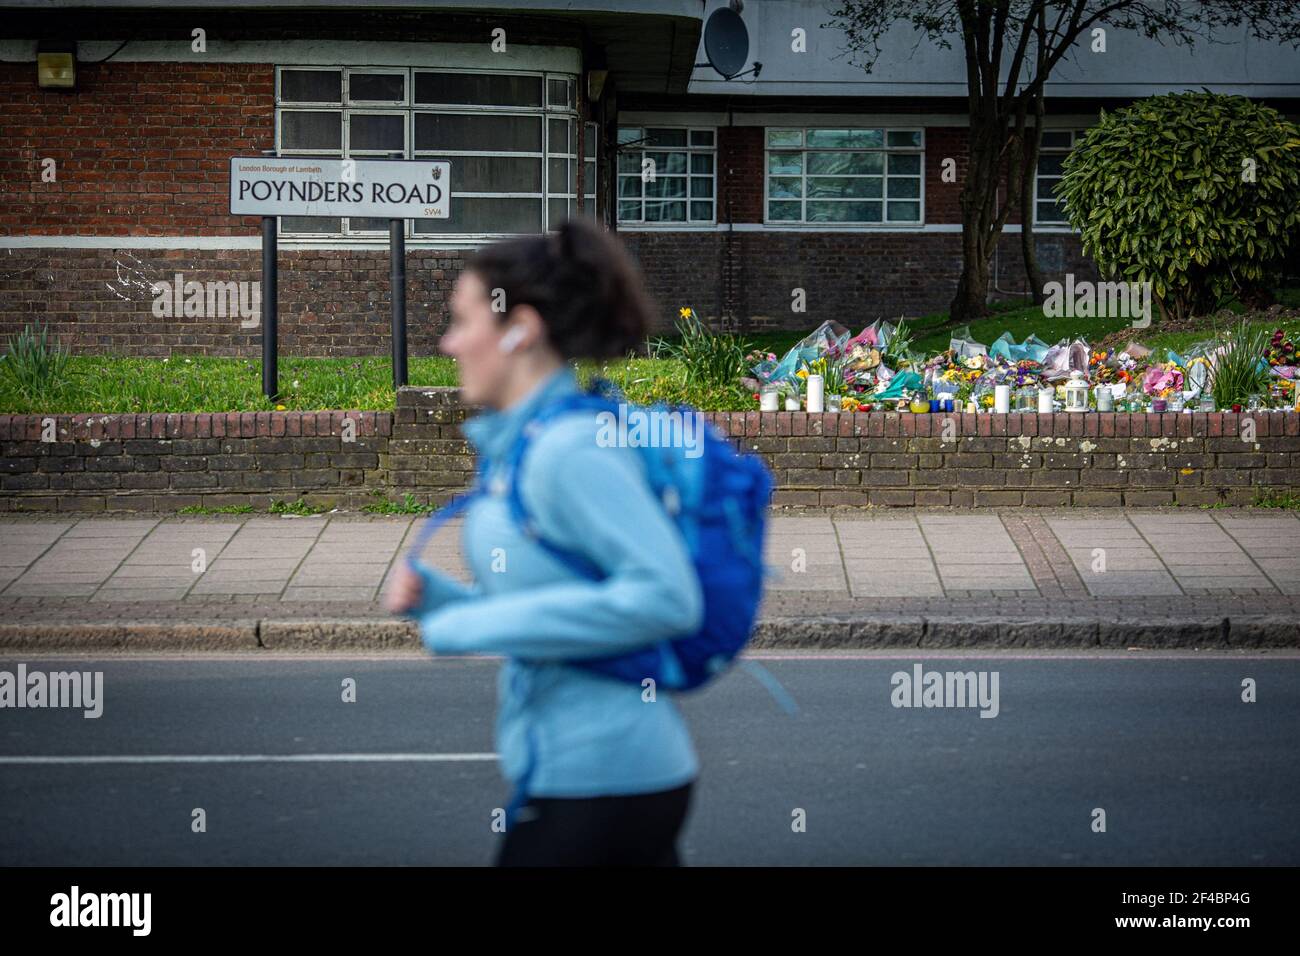 A woman runs along the A205 Poynders Road in Clapham, south London, after CCTV of missing woman Sarah Everard, 33, was discovered. Sarah left a friend Stock Photo